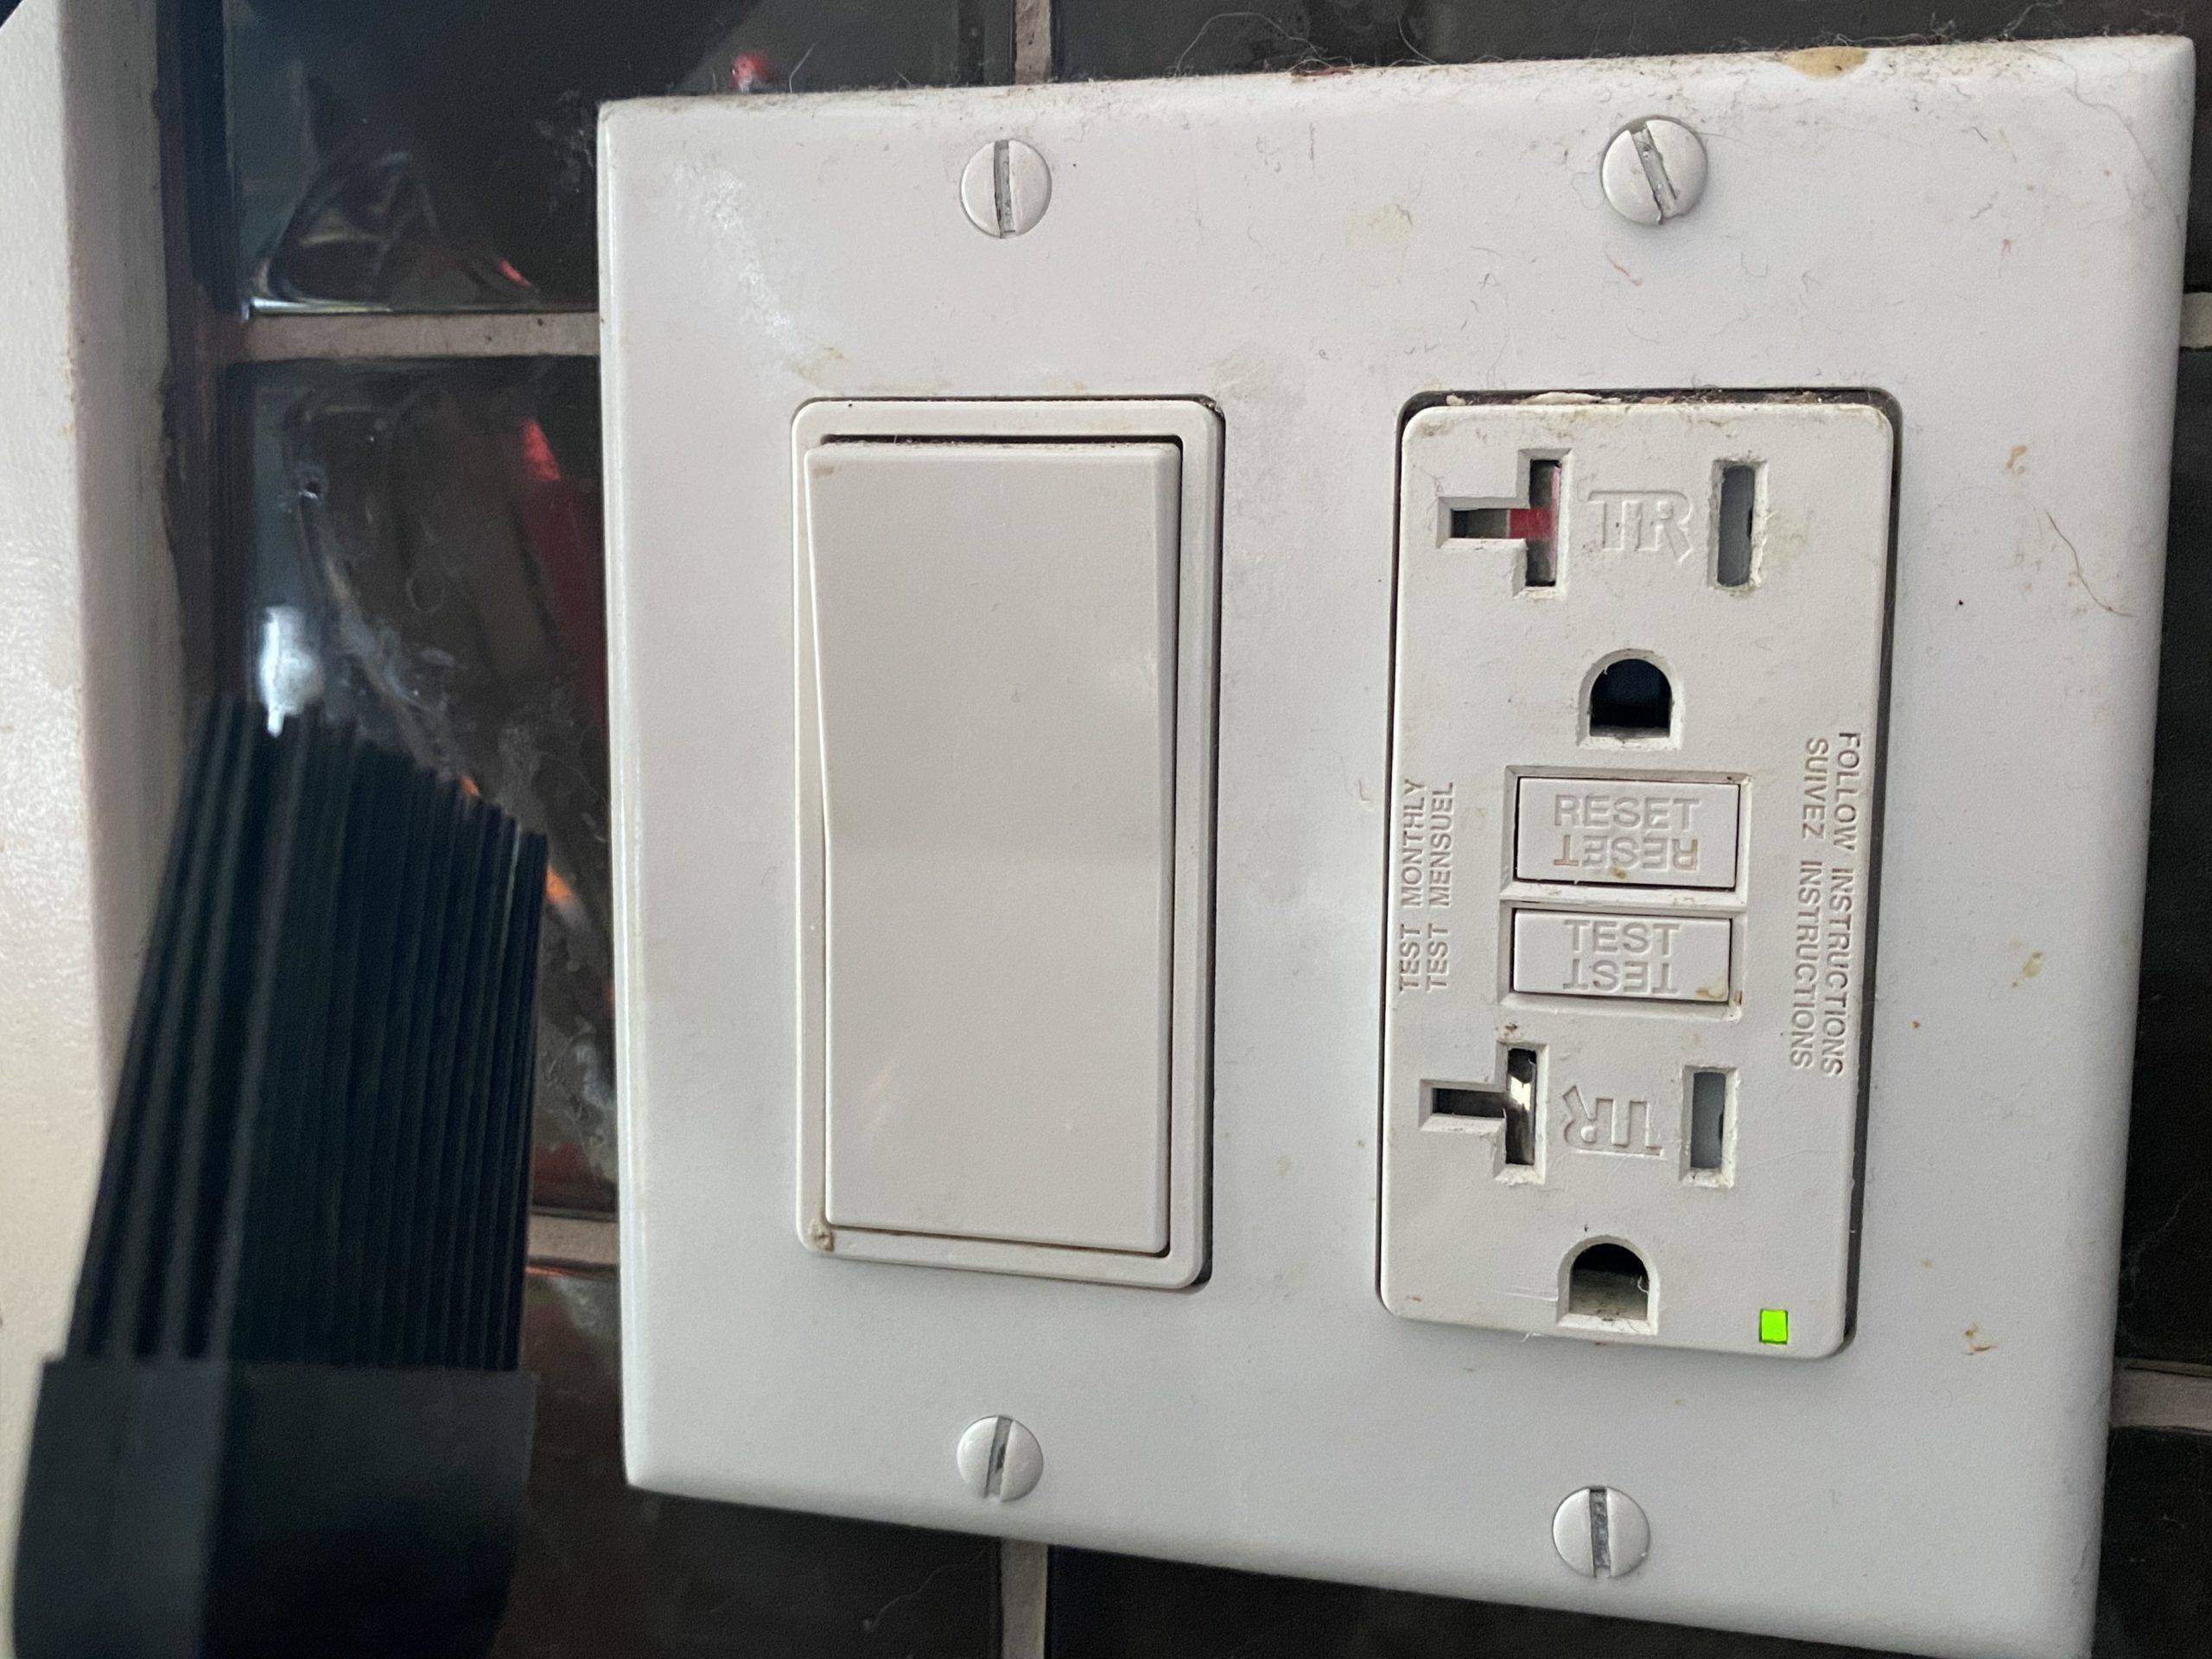 gfci outlet with test and reset button visible